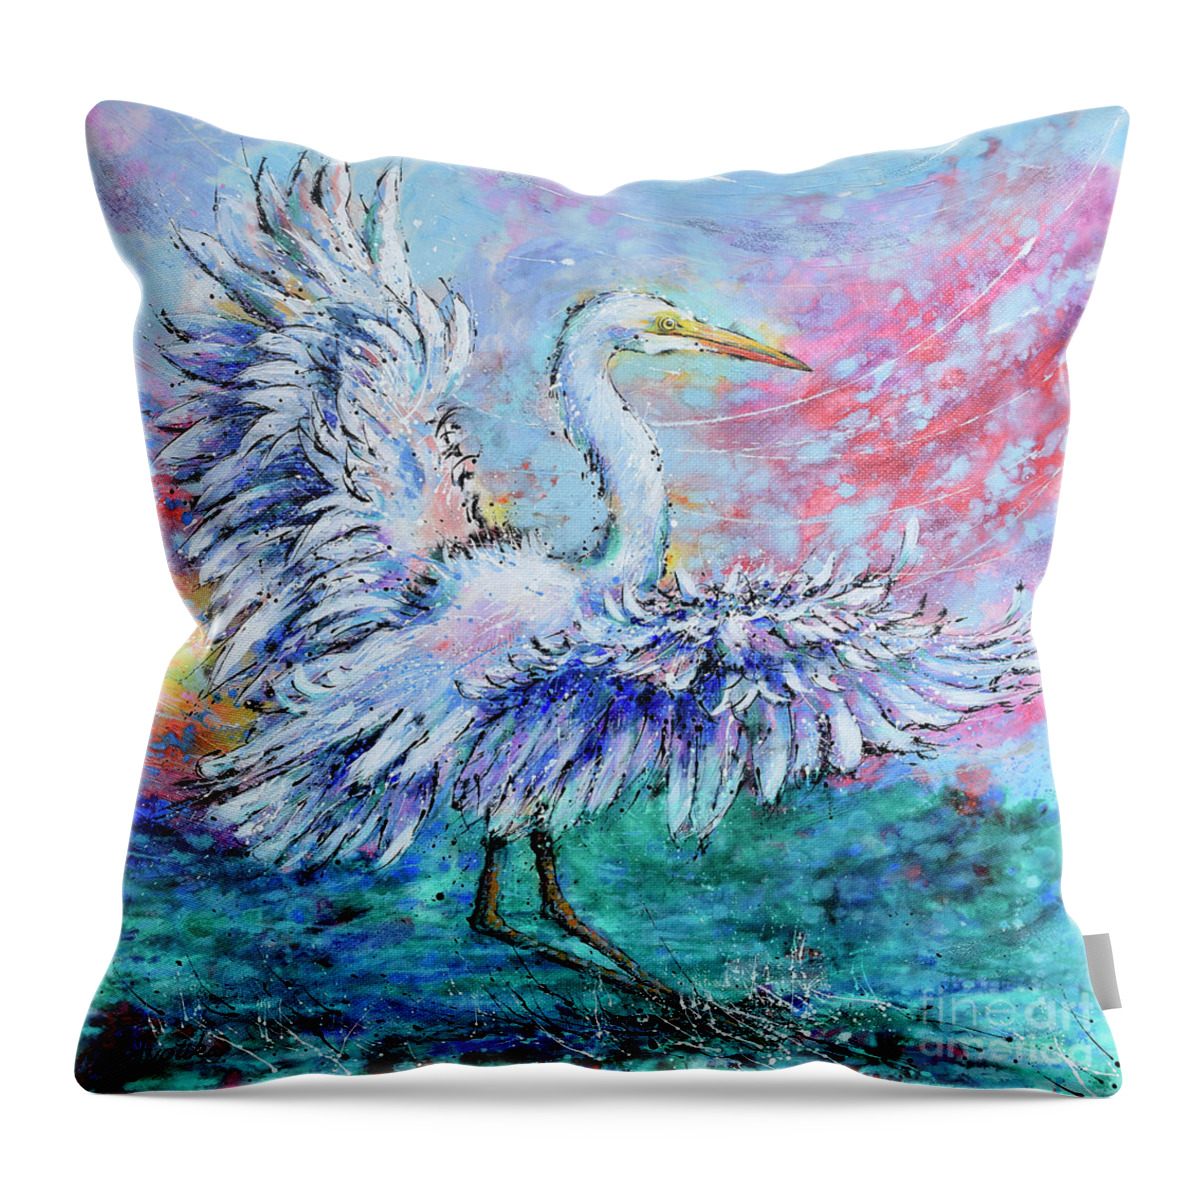  Throw Pillow featuring the painting Great Egret's Glorious Landing by Jyotika Shroff